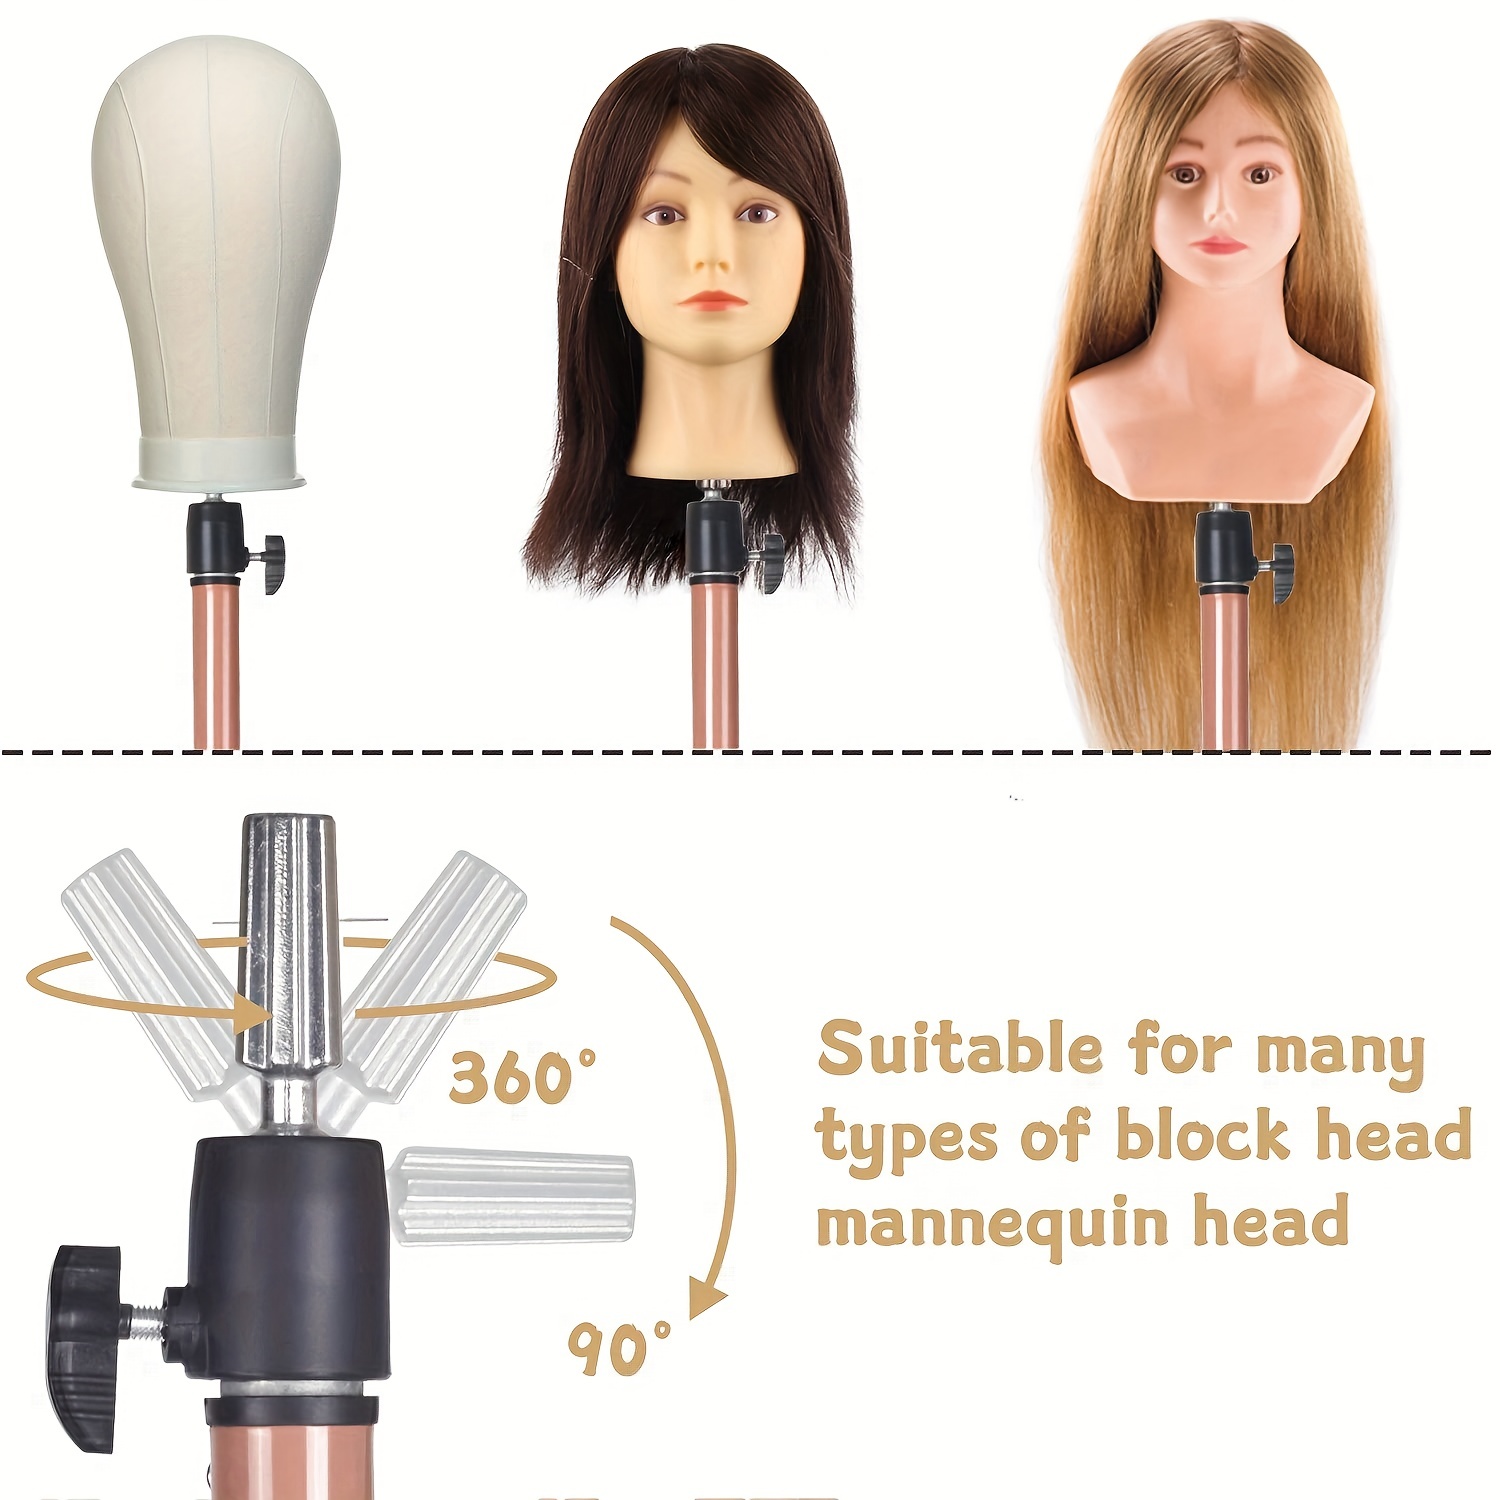 Canvas Wig Block for Wig Styling or Storage